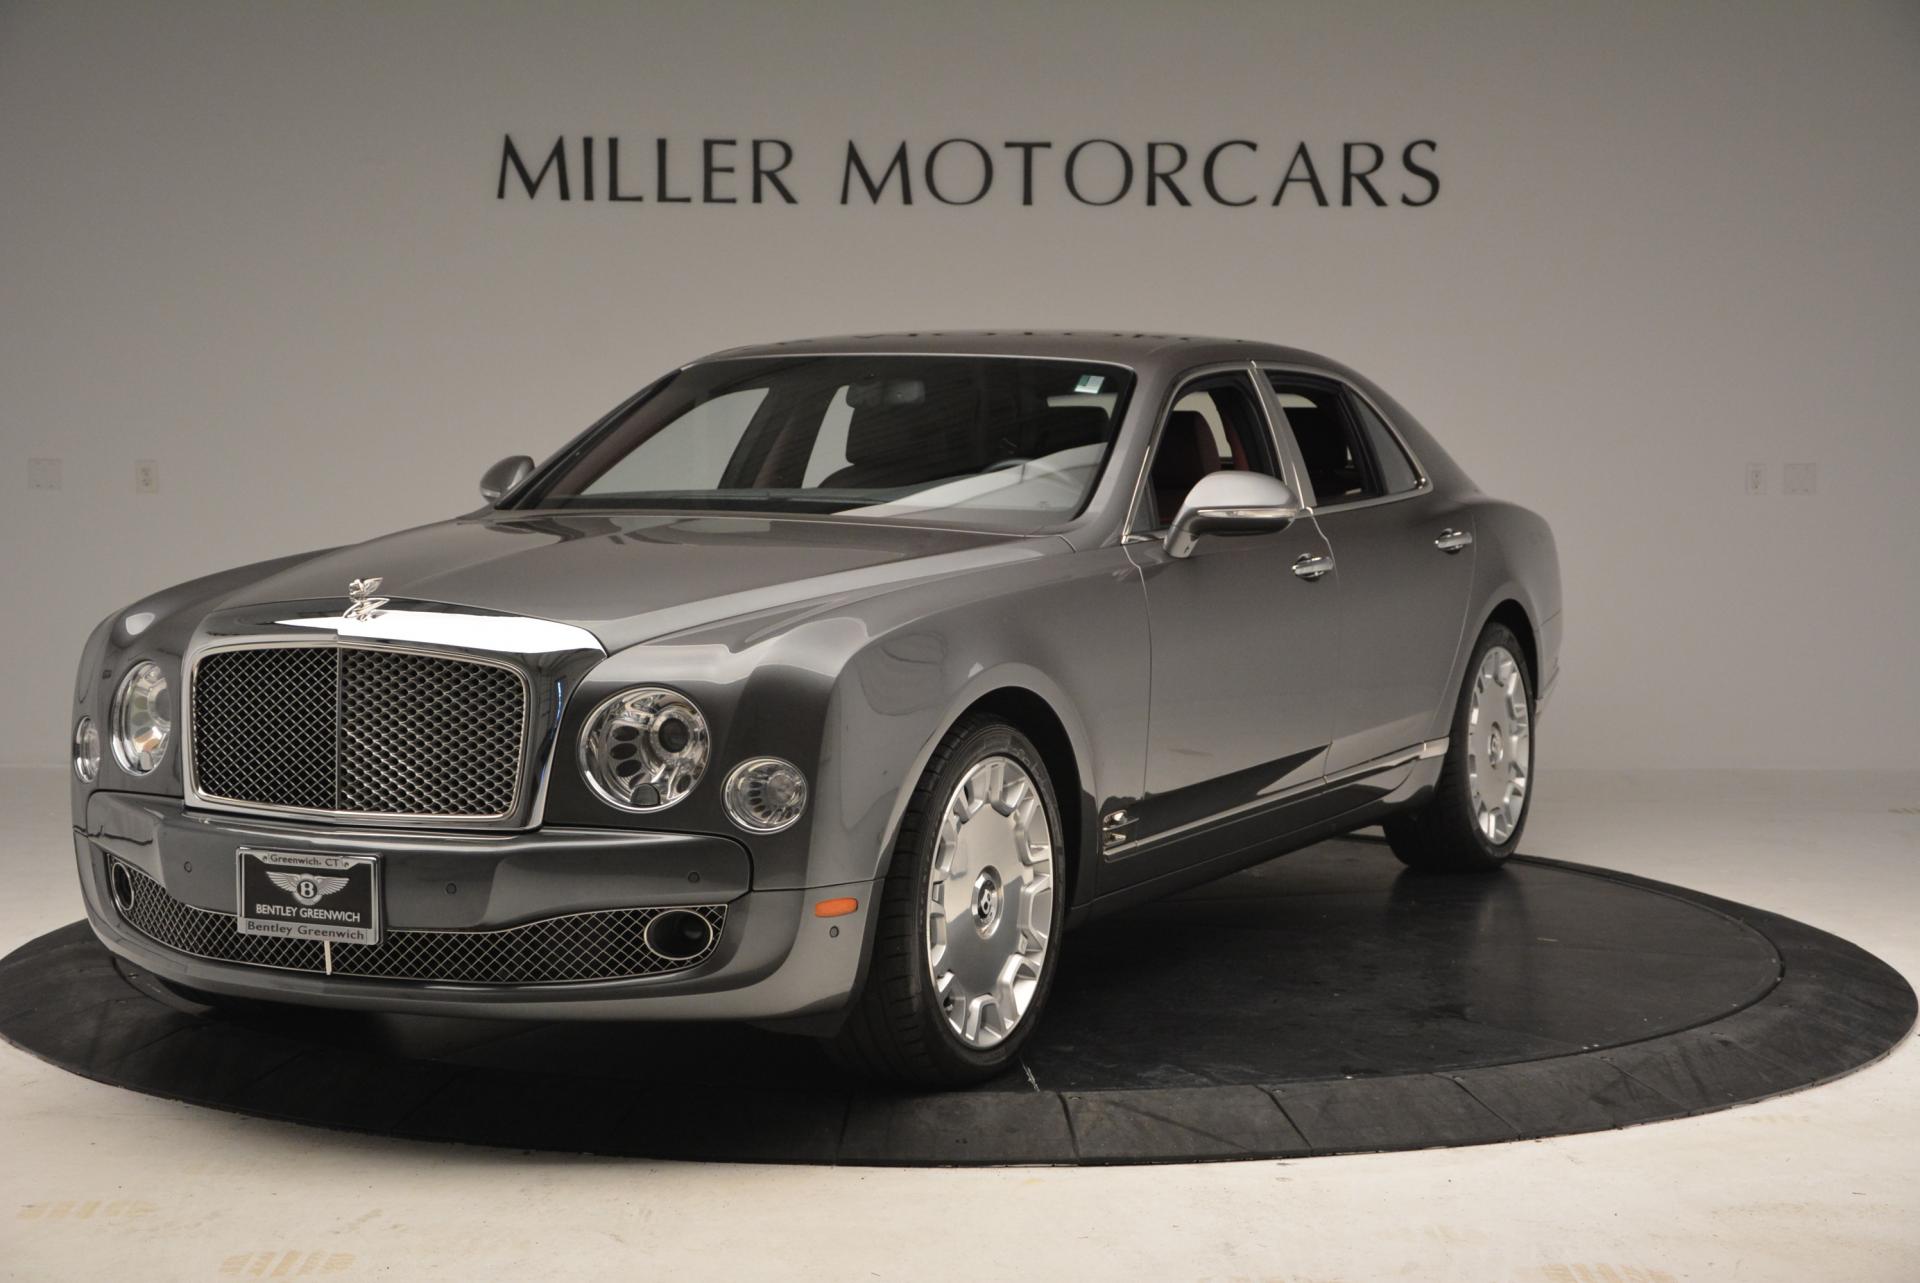 Used 2011 Bentley Mulsanne for sale Sold at Maserati of Greenwich in Greenwich CT 06830 1